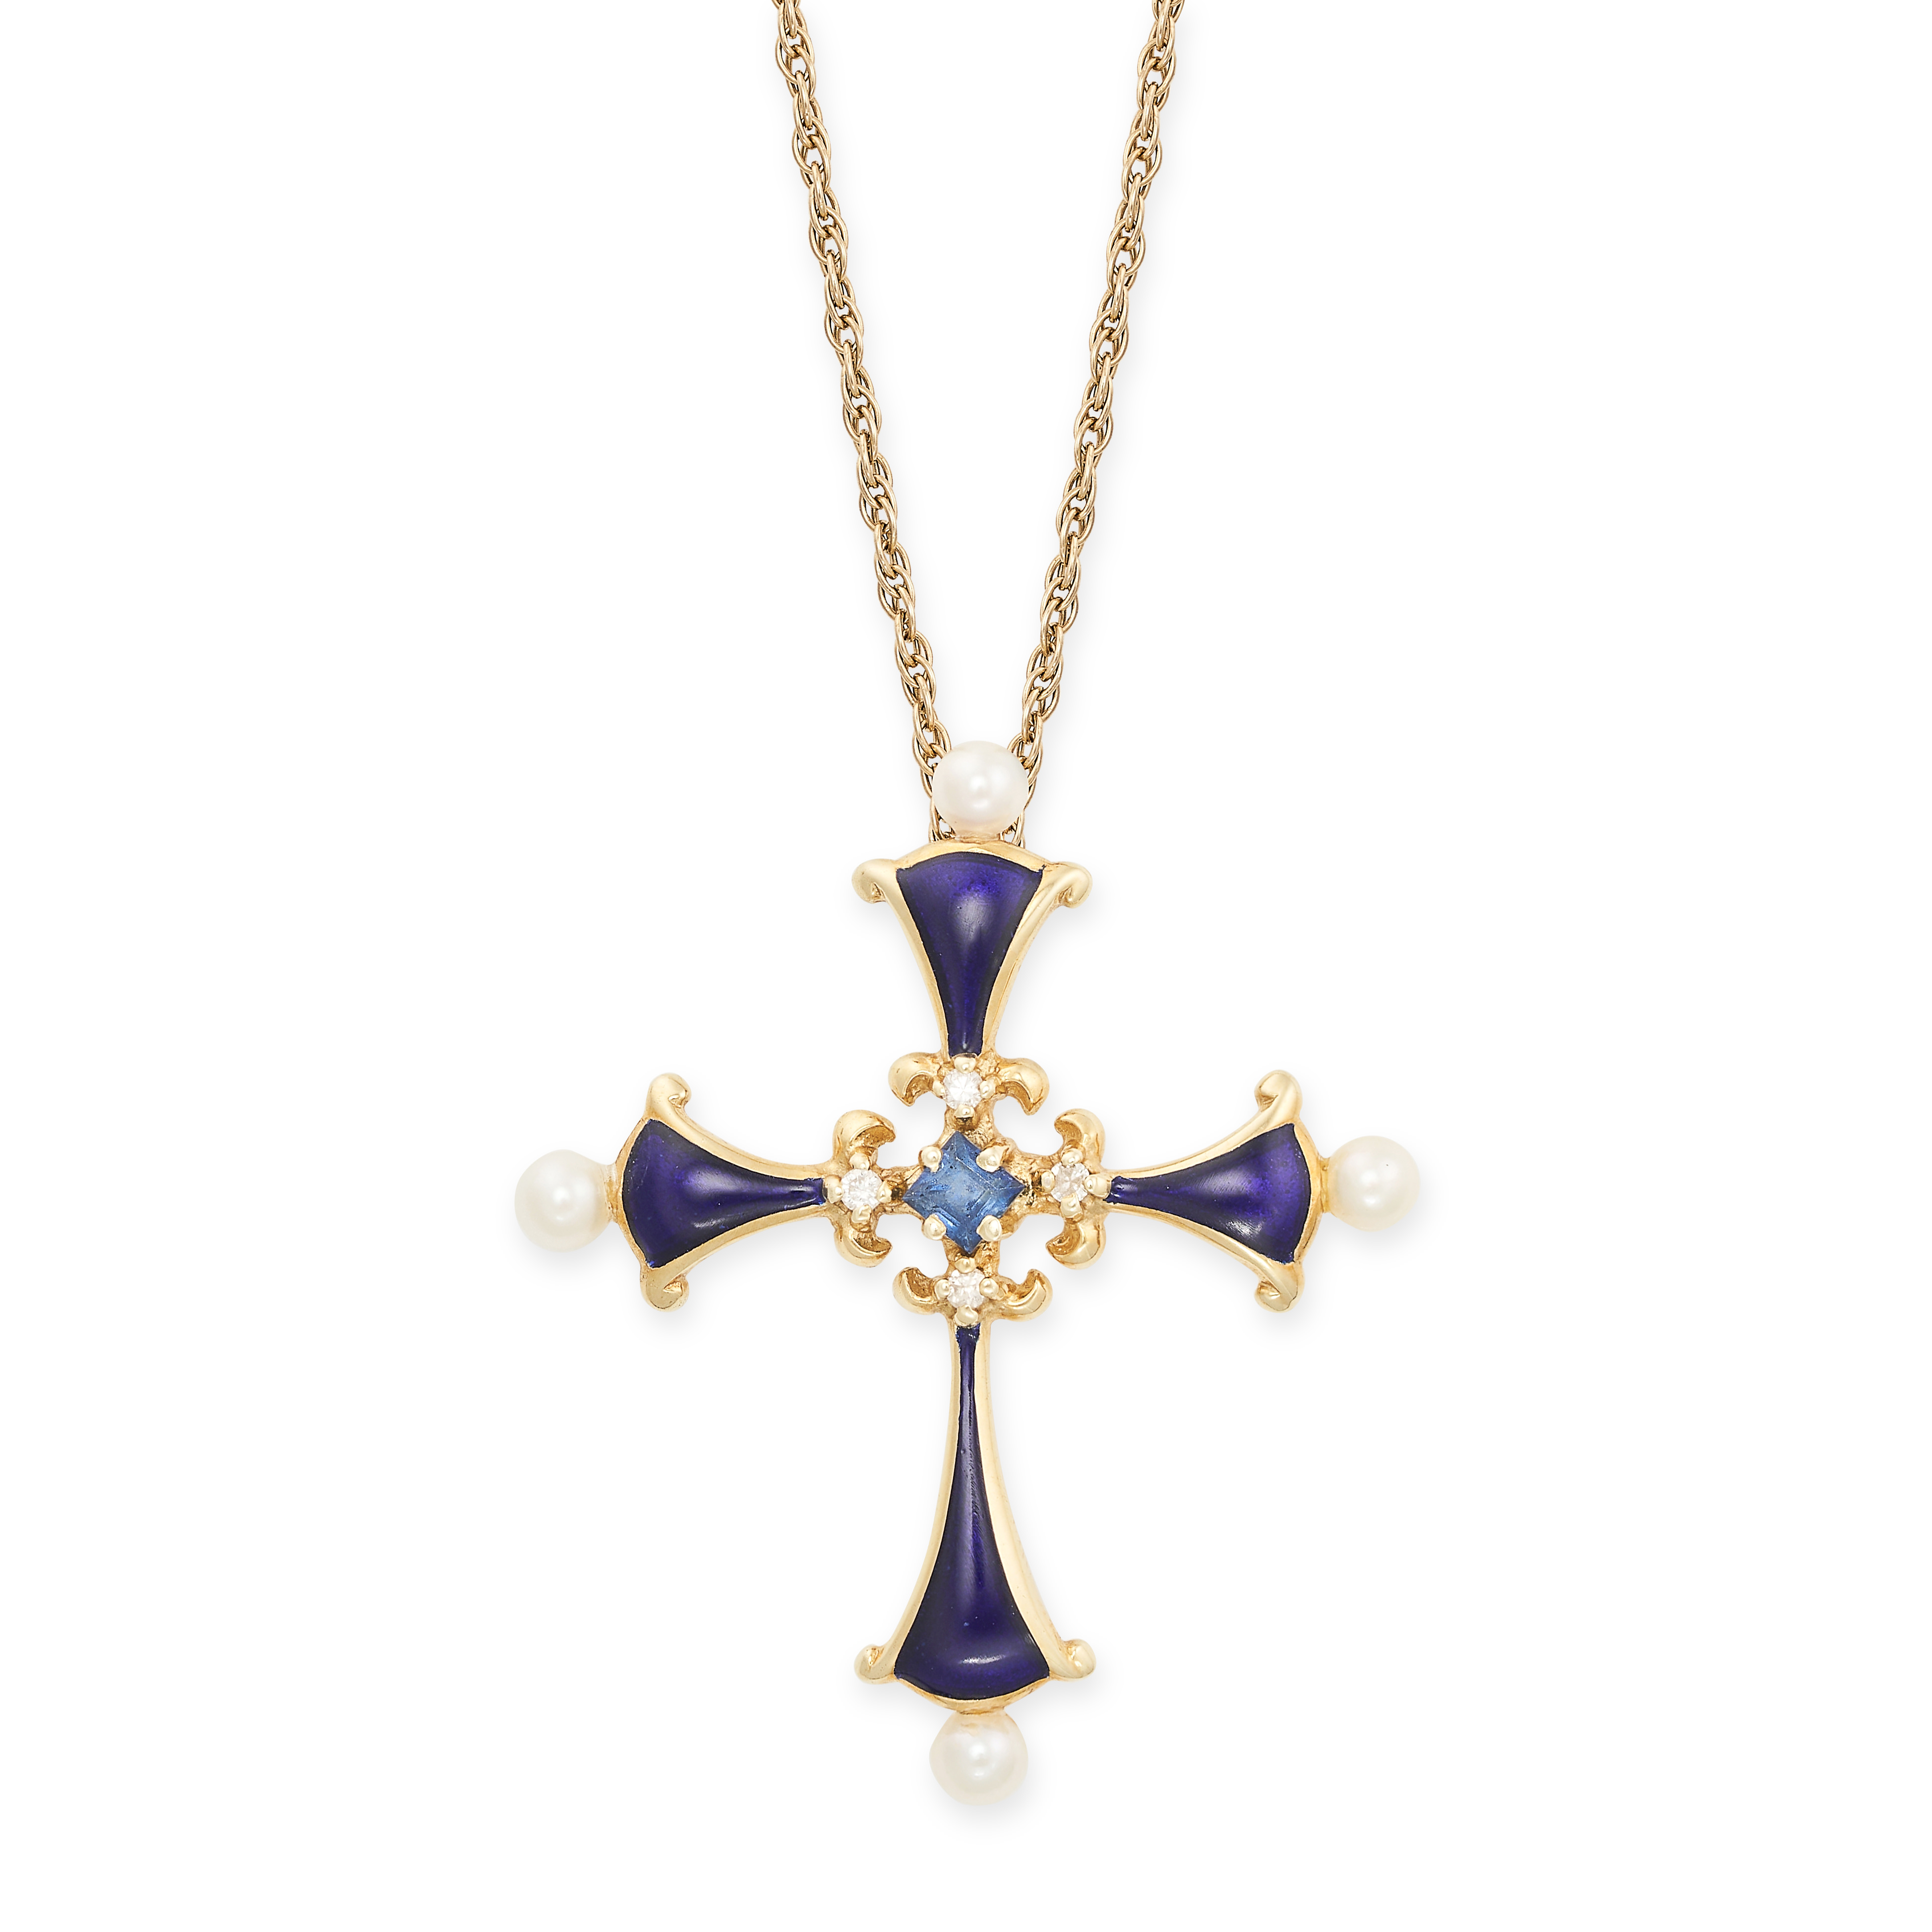 IGOR CARL FABERGE, A VINTAGE SAPPHIRE, DIAMOND PEARL AND ENAMEL CROSS PENDANT NECKLACE 1980s in 14ct